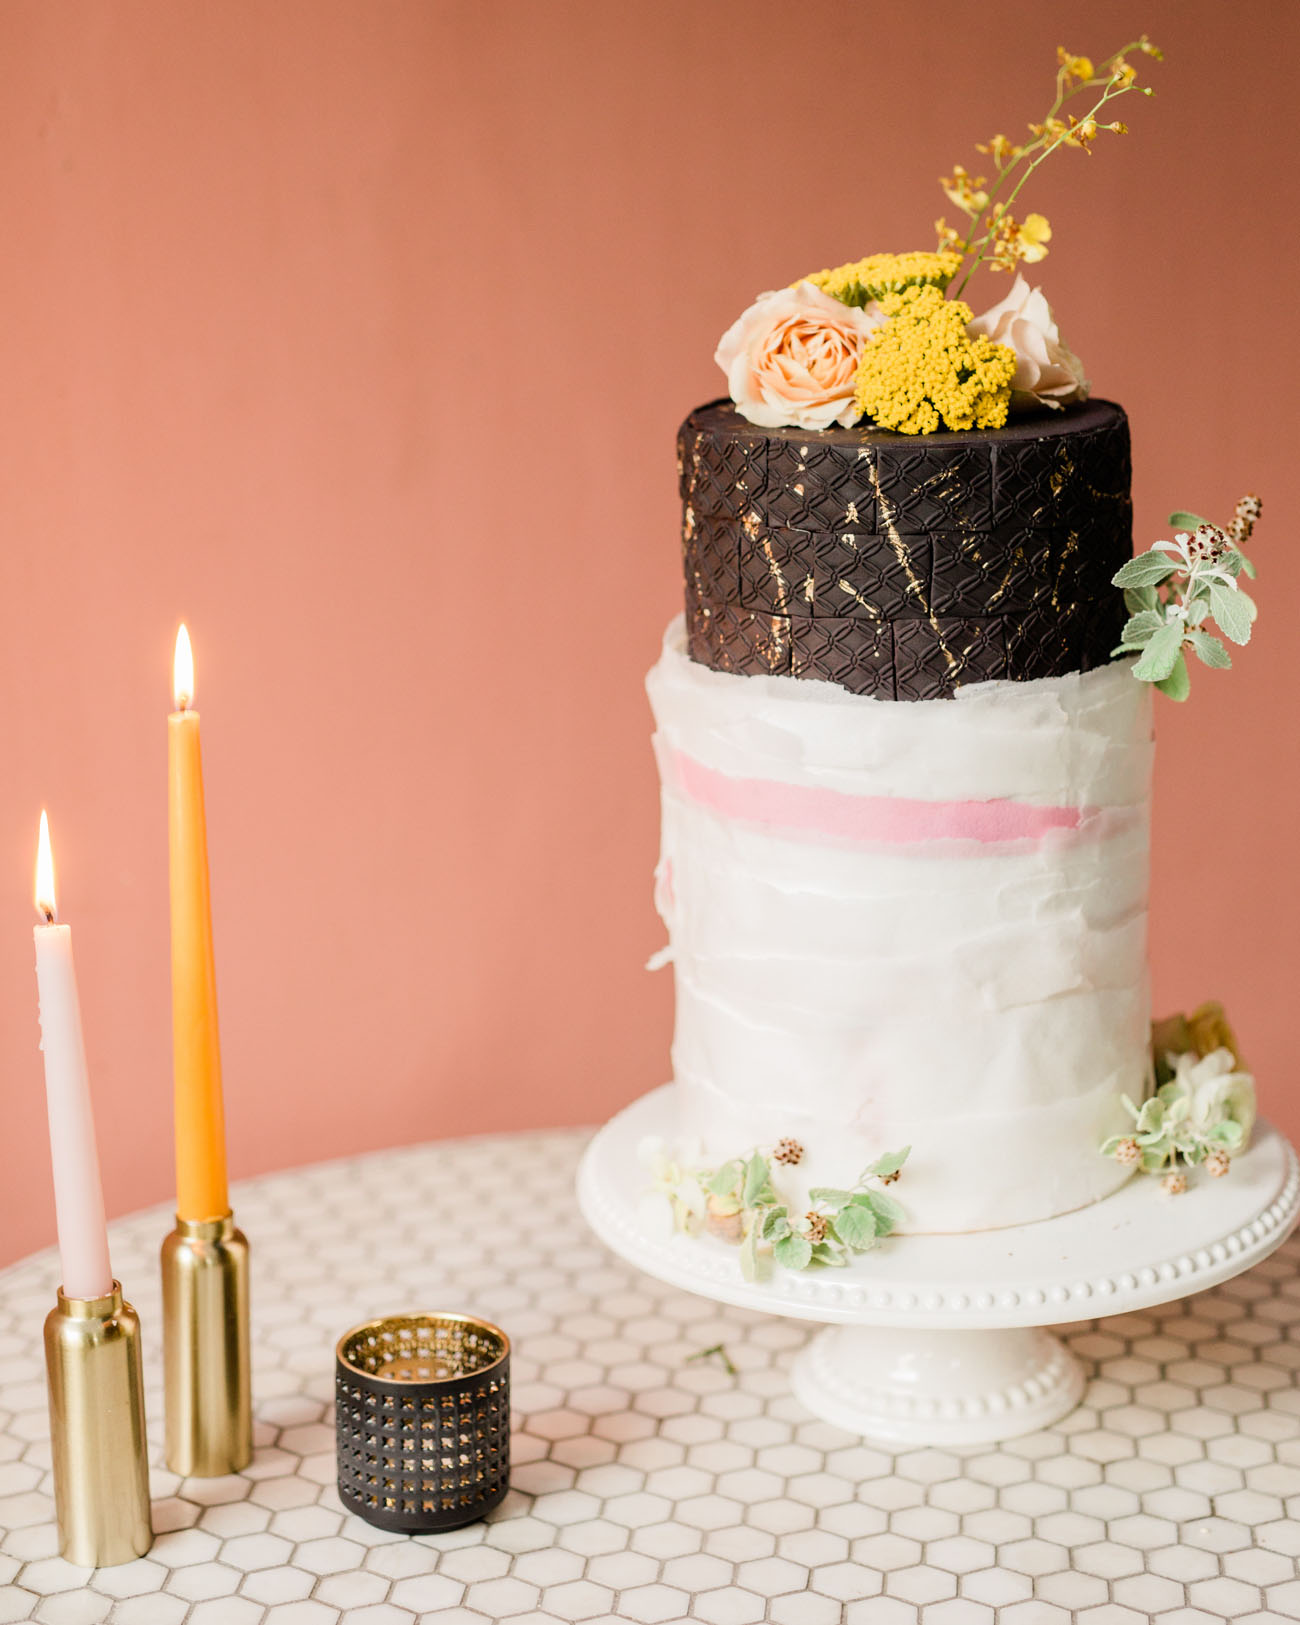 The wedding cake was textural and unique, with black and white parts and fresh blooms on top